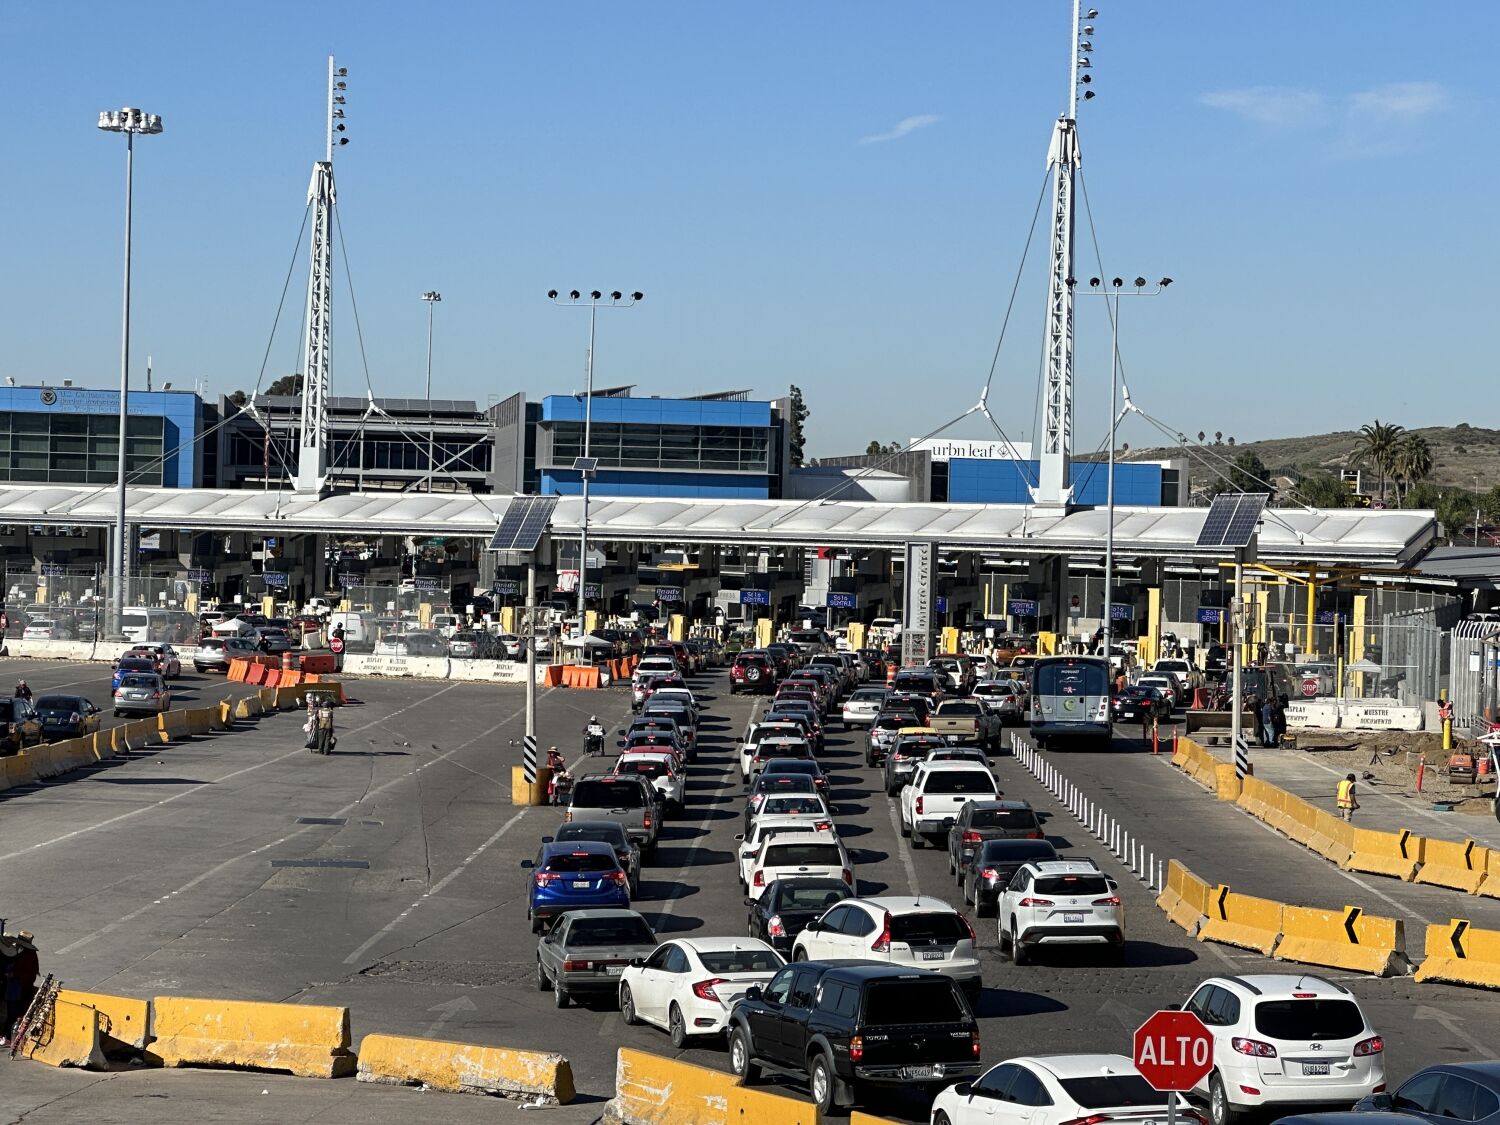 Following Mexico's checkpoint installation, extra layer of U.S. border officials disappears from SENTRI line